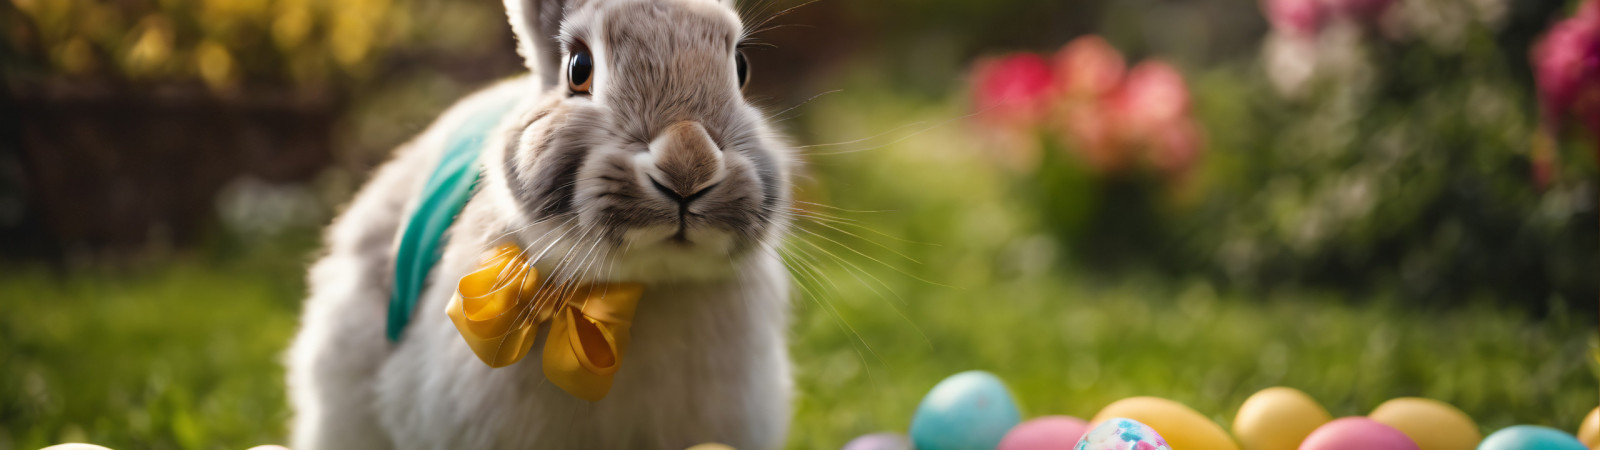 Easter bunny with colorful eggs in the garden. Happy Easter.